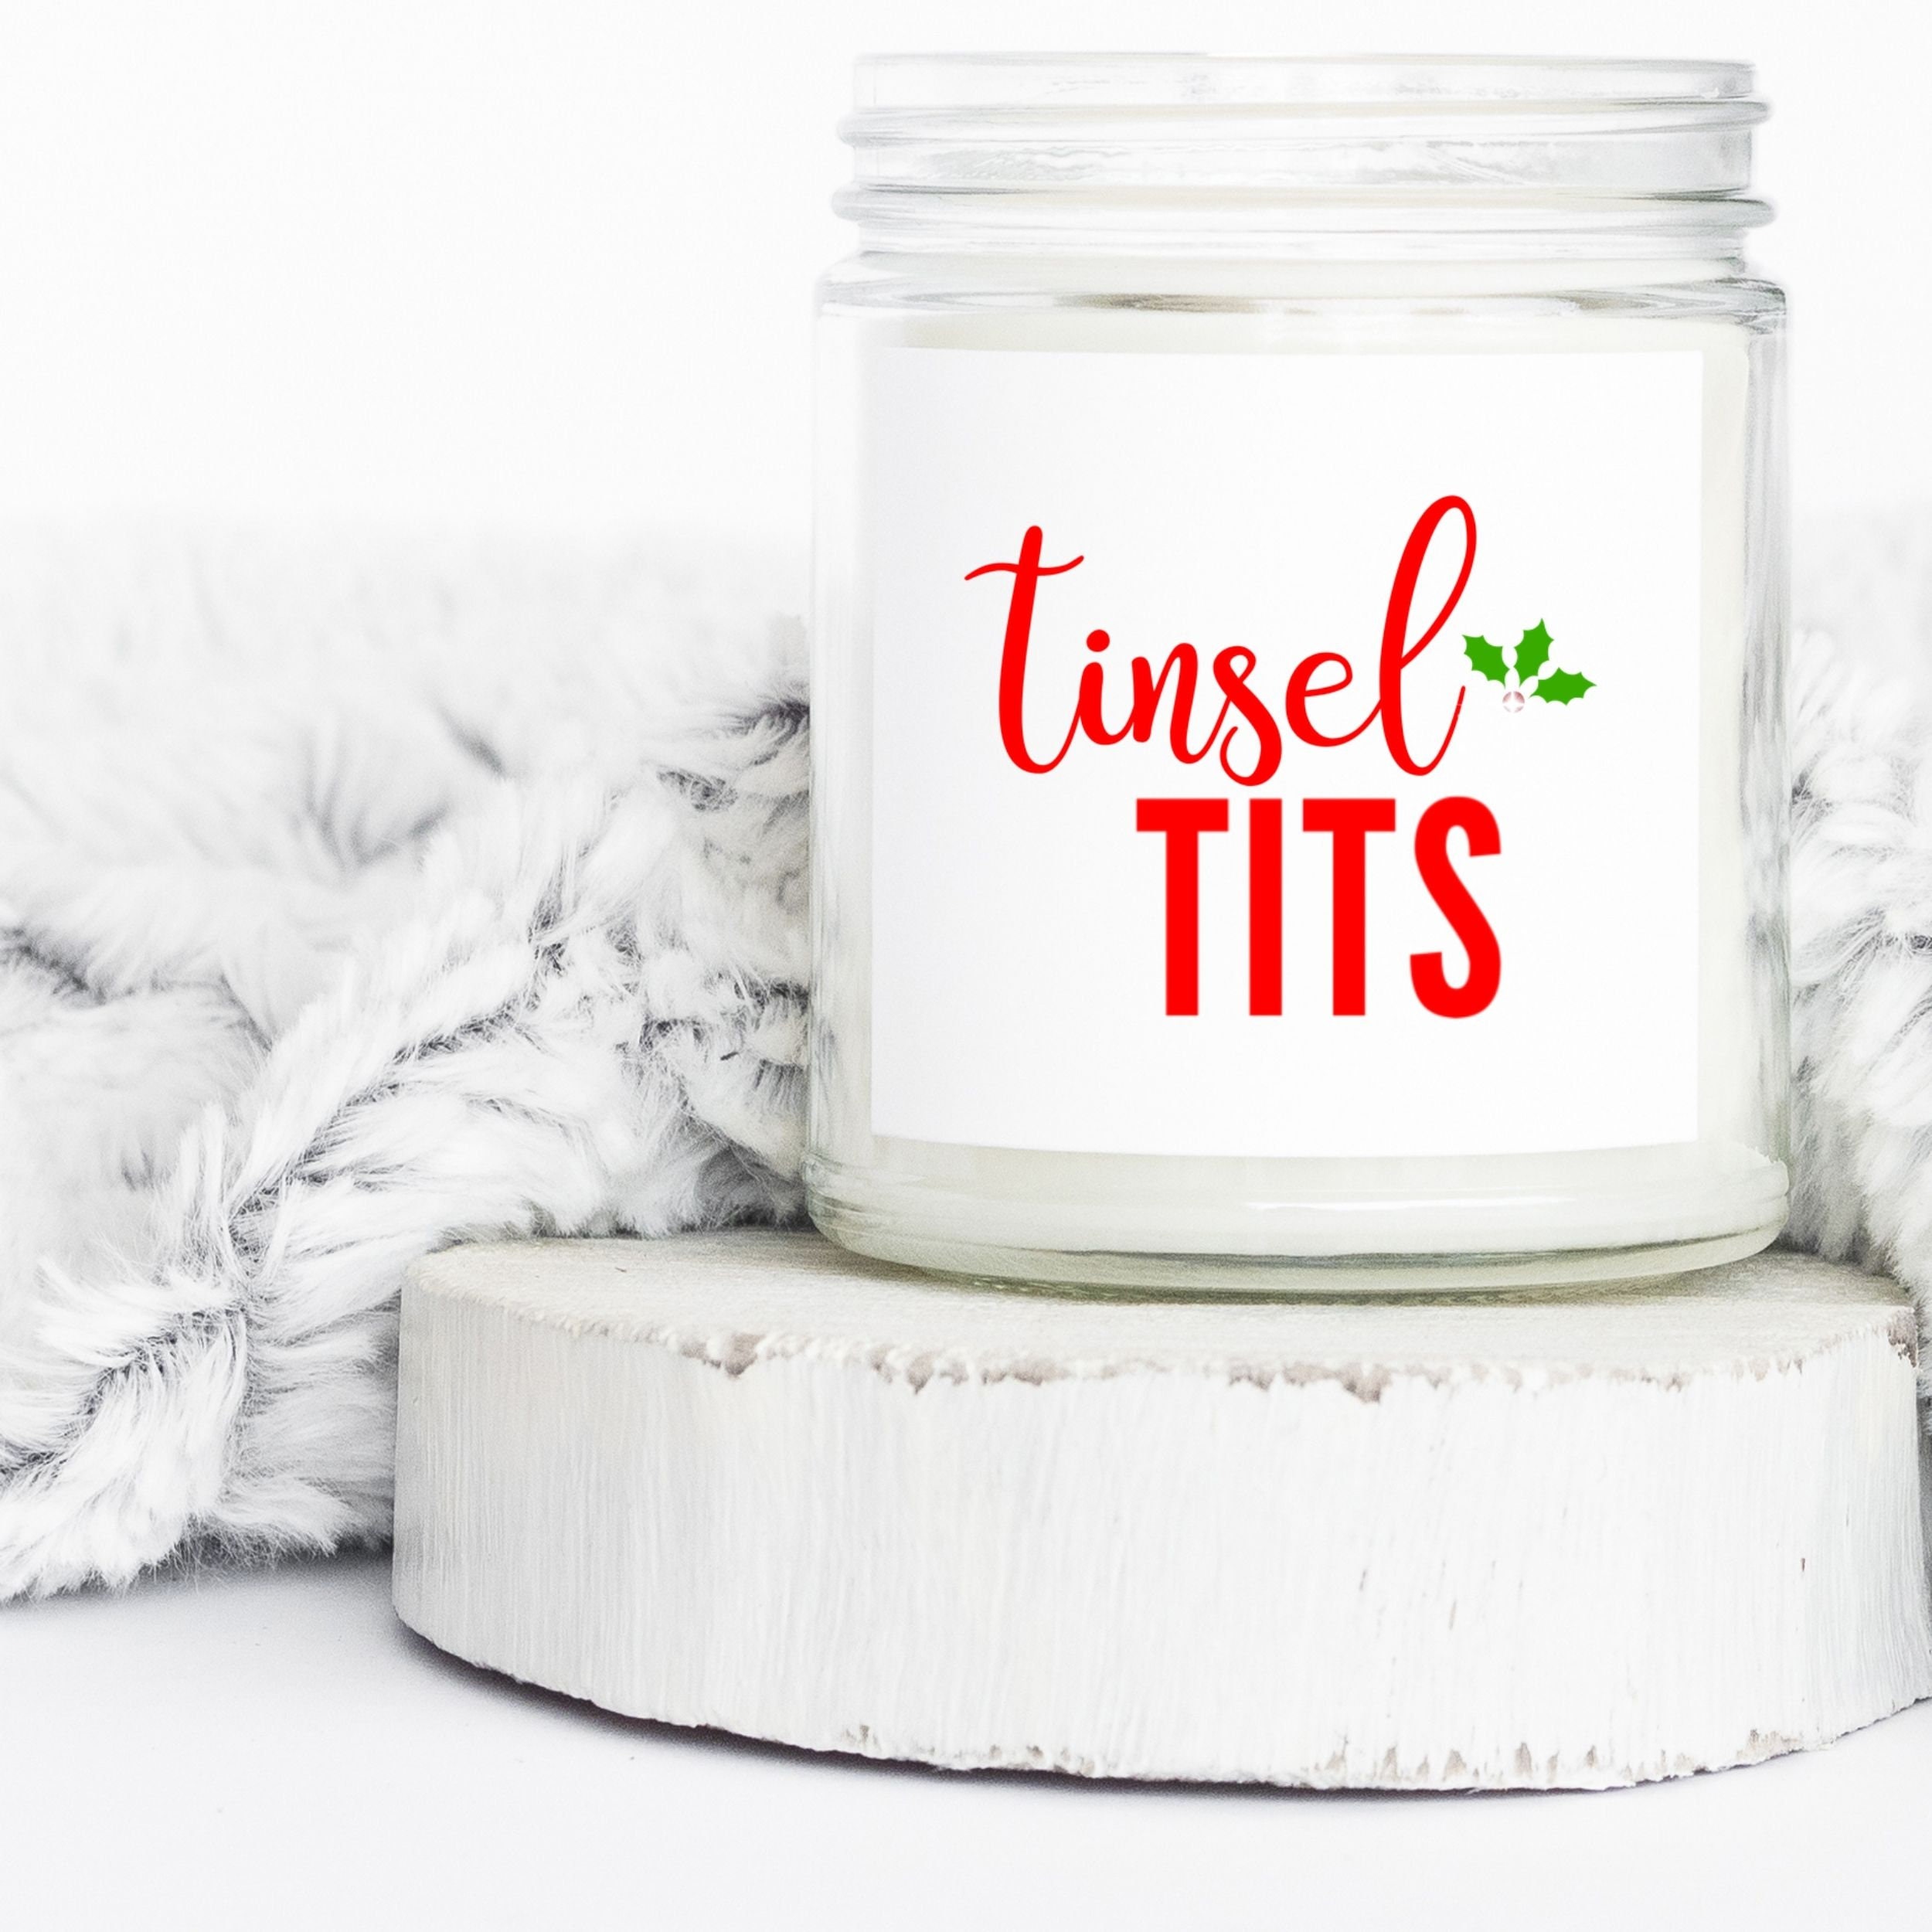 Tinsel Tits Scented Candle